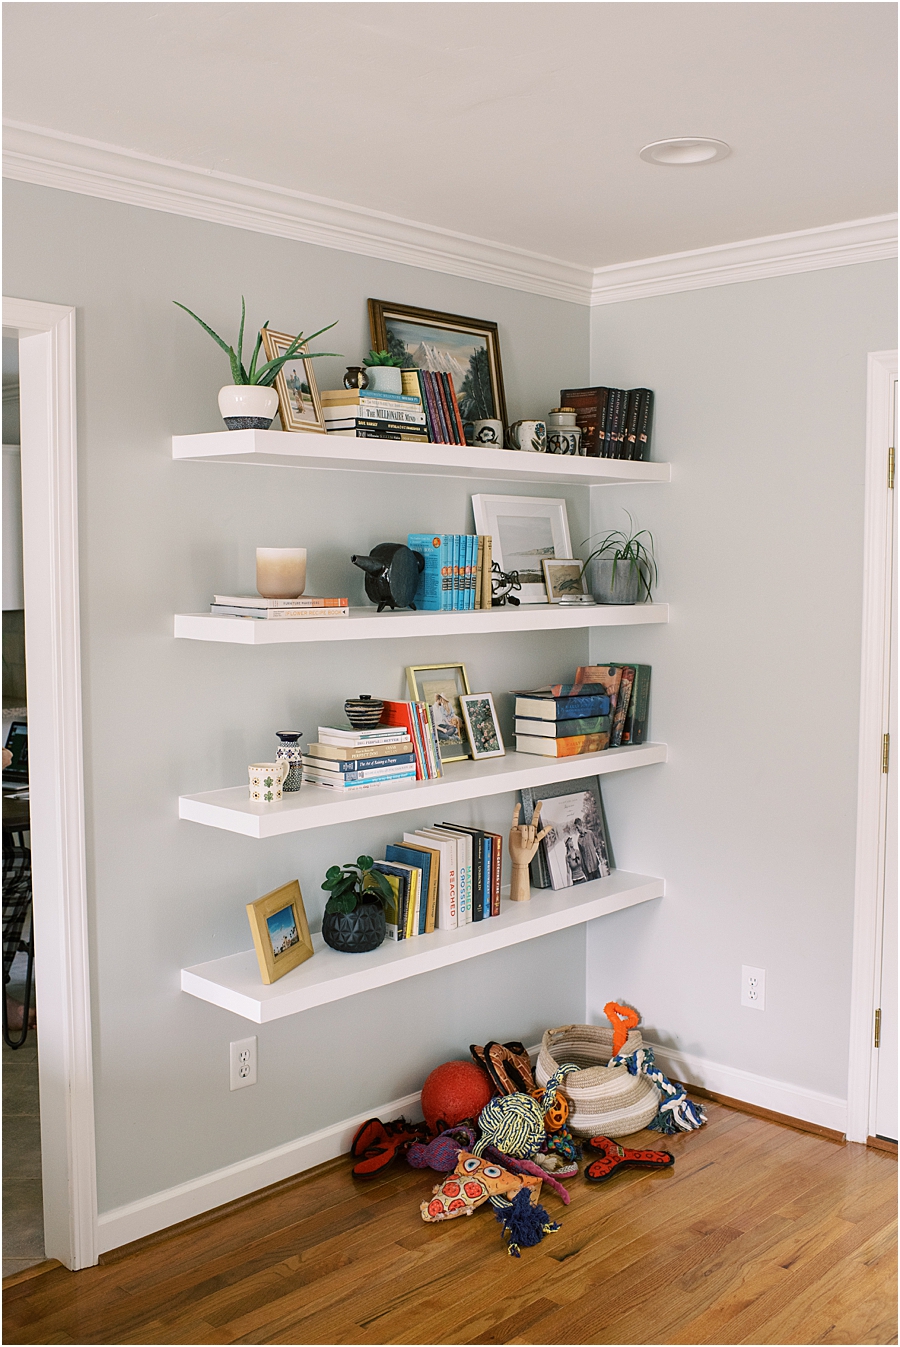 My Living Room Reveal, Hillary Bookcase Bedroom Ideas